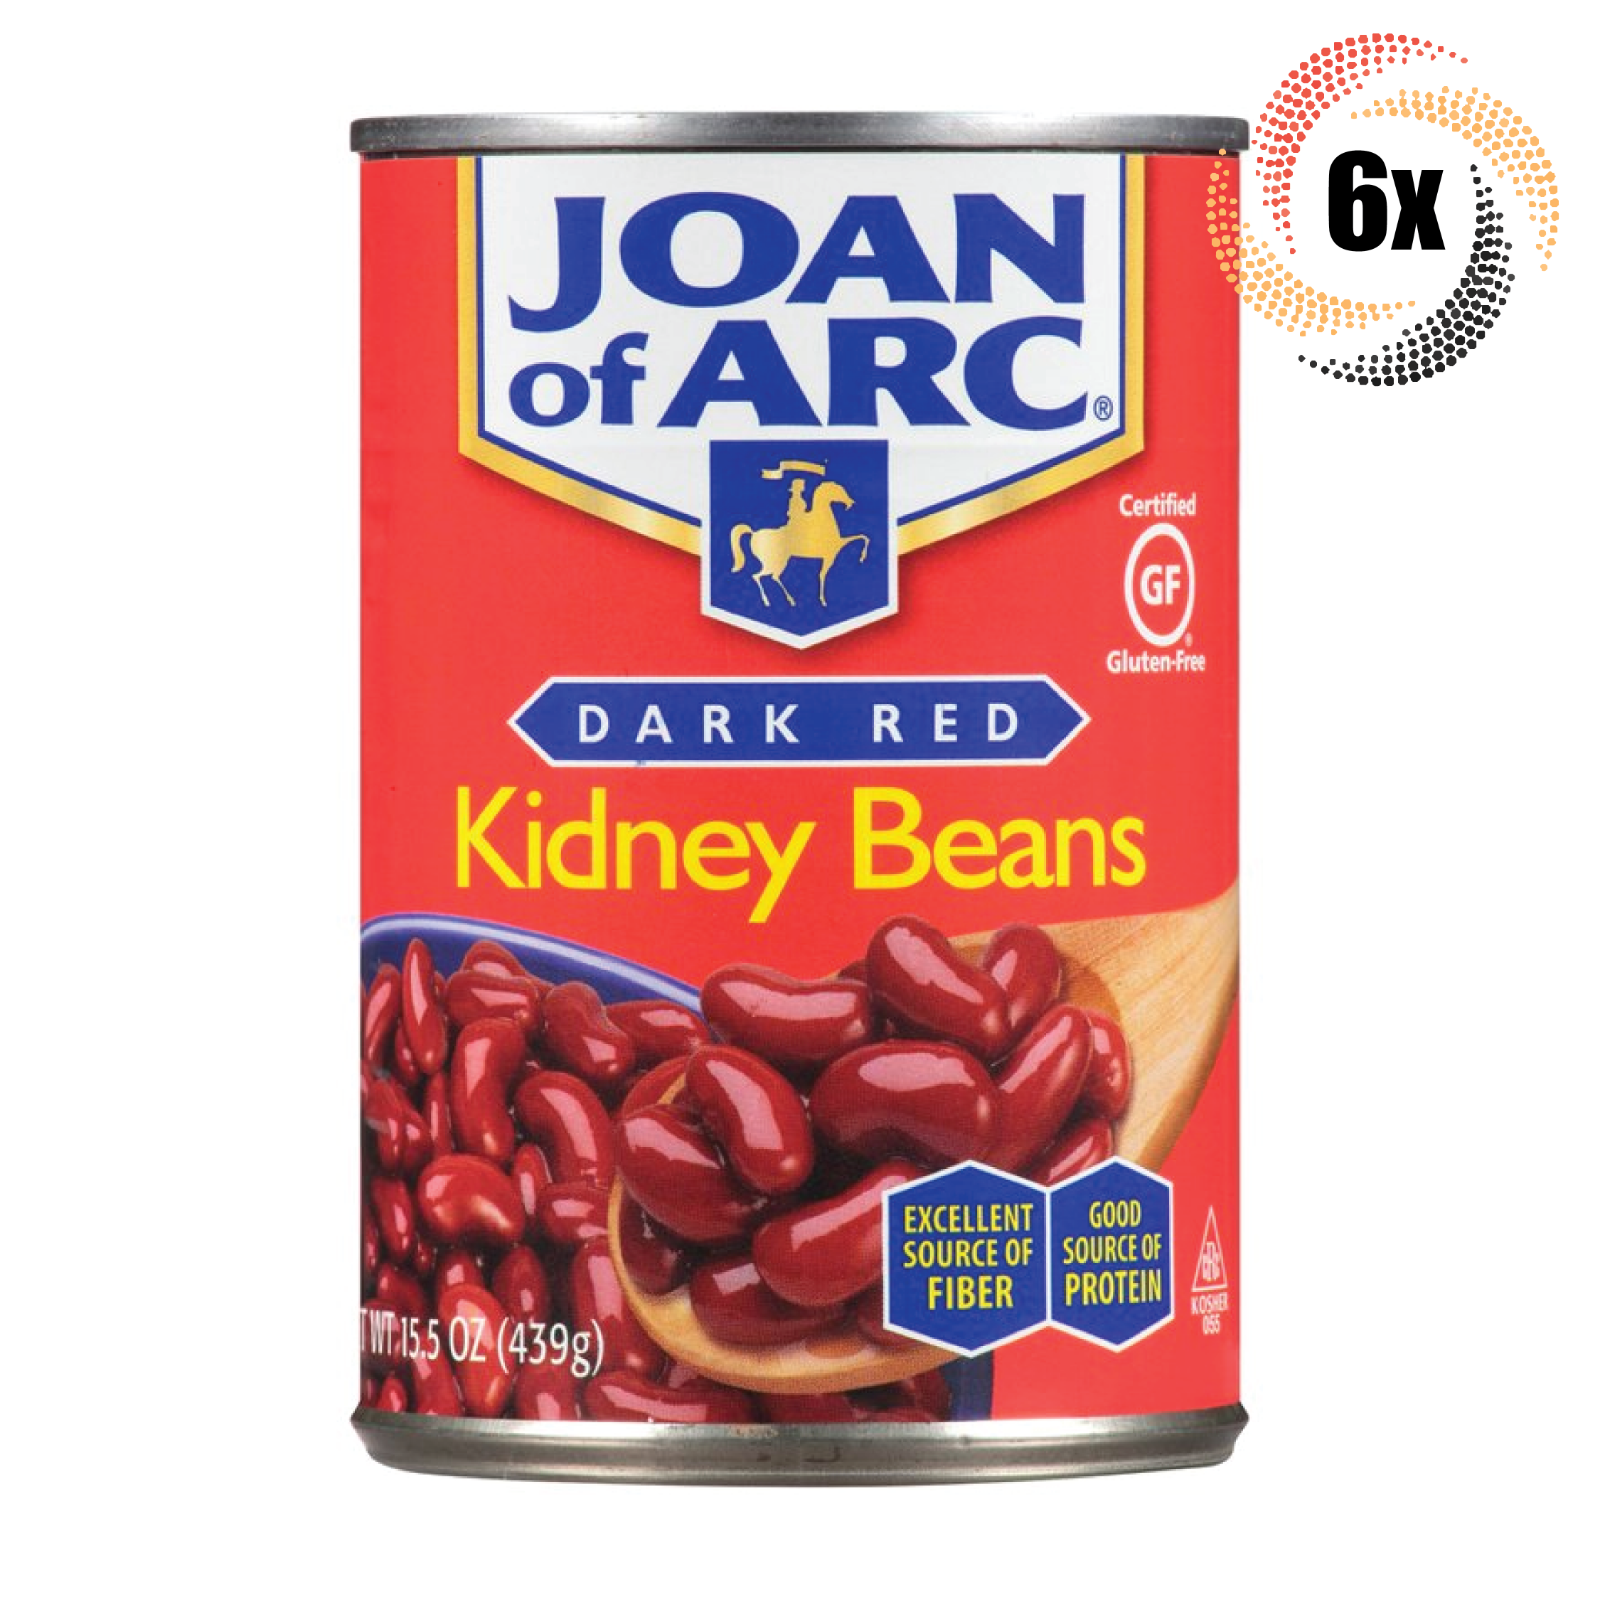 Primary image for 6x Cans Joan of Arc Dark Red Kidney Beans | 15.5 fl oz | Fast Shipping!